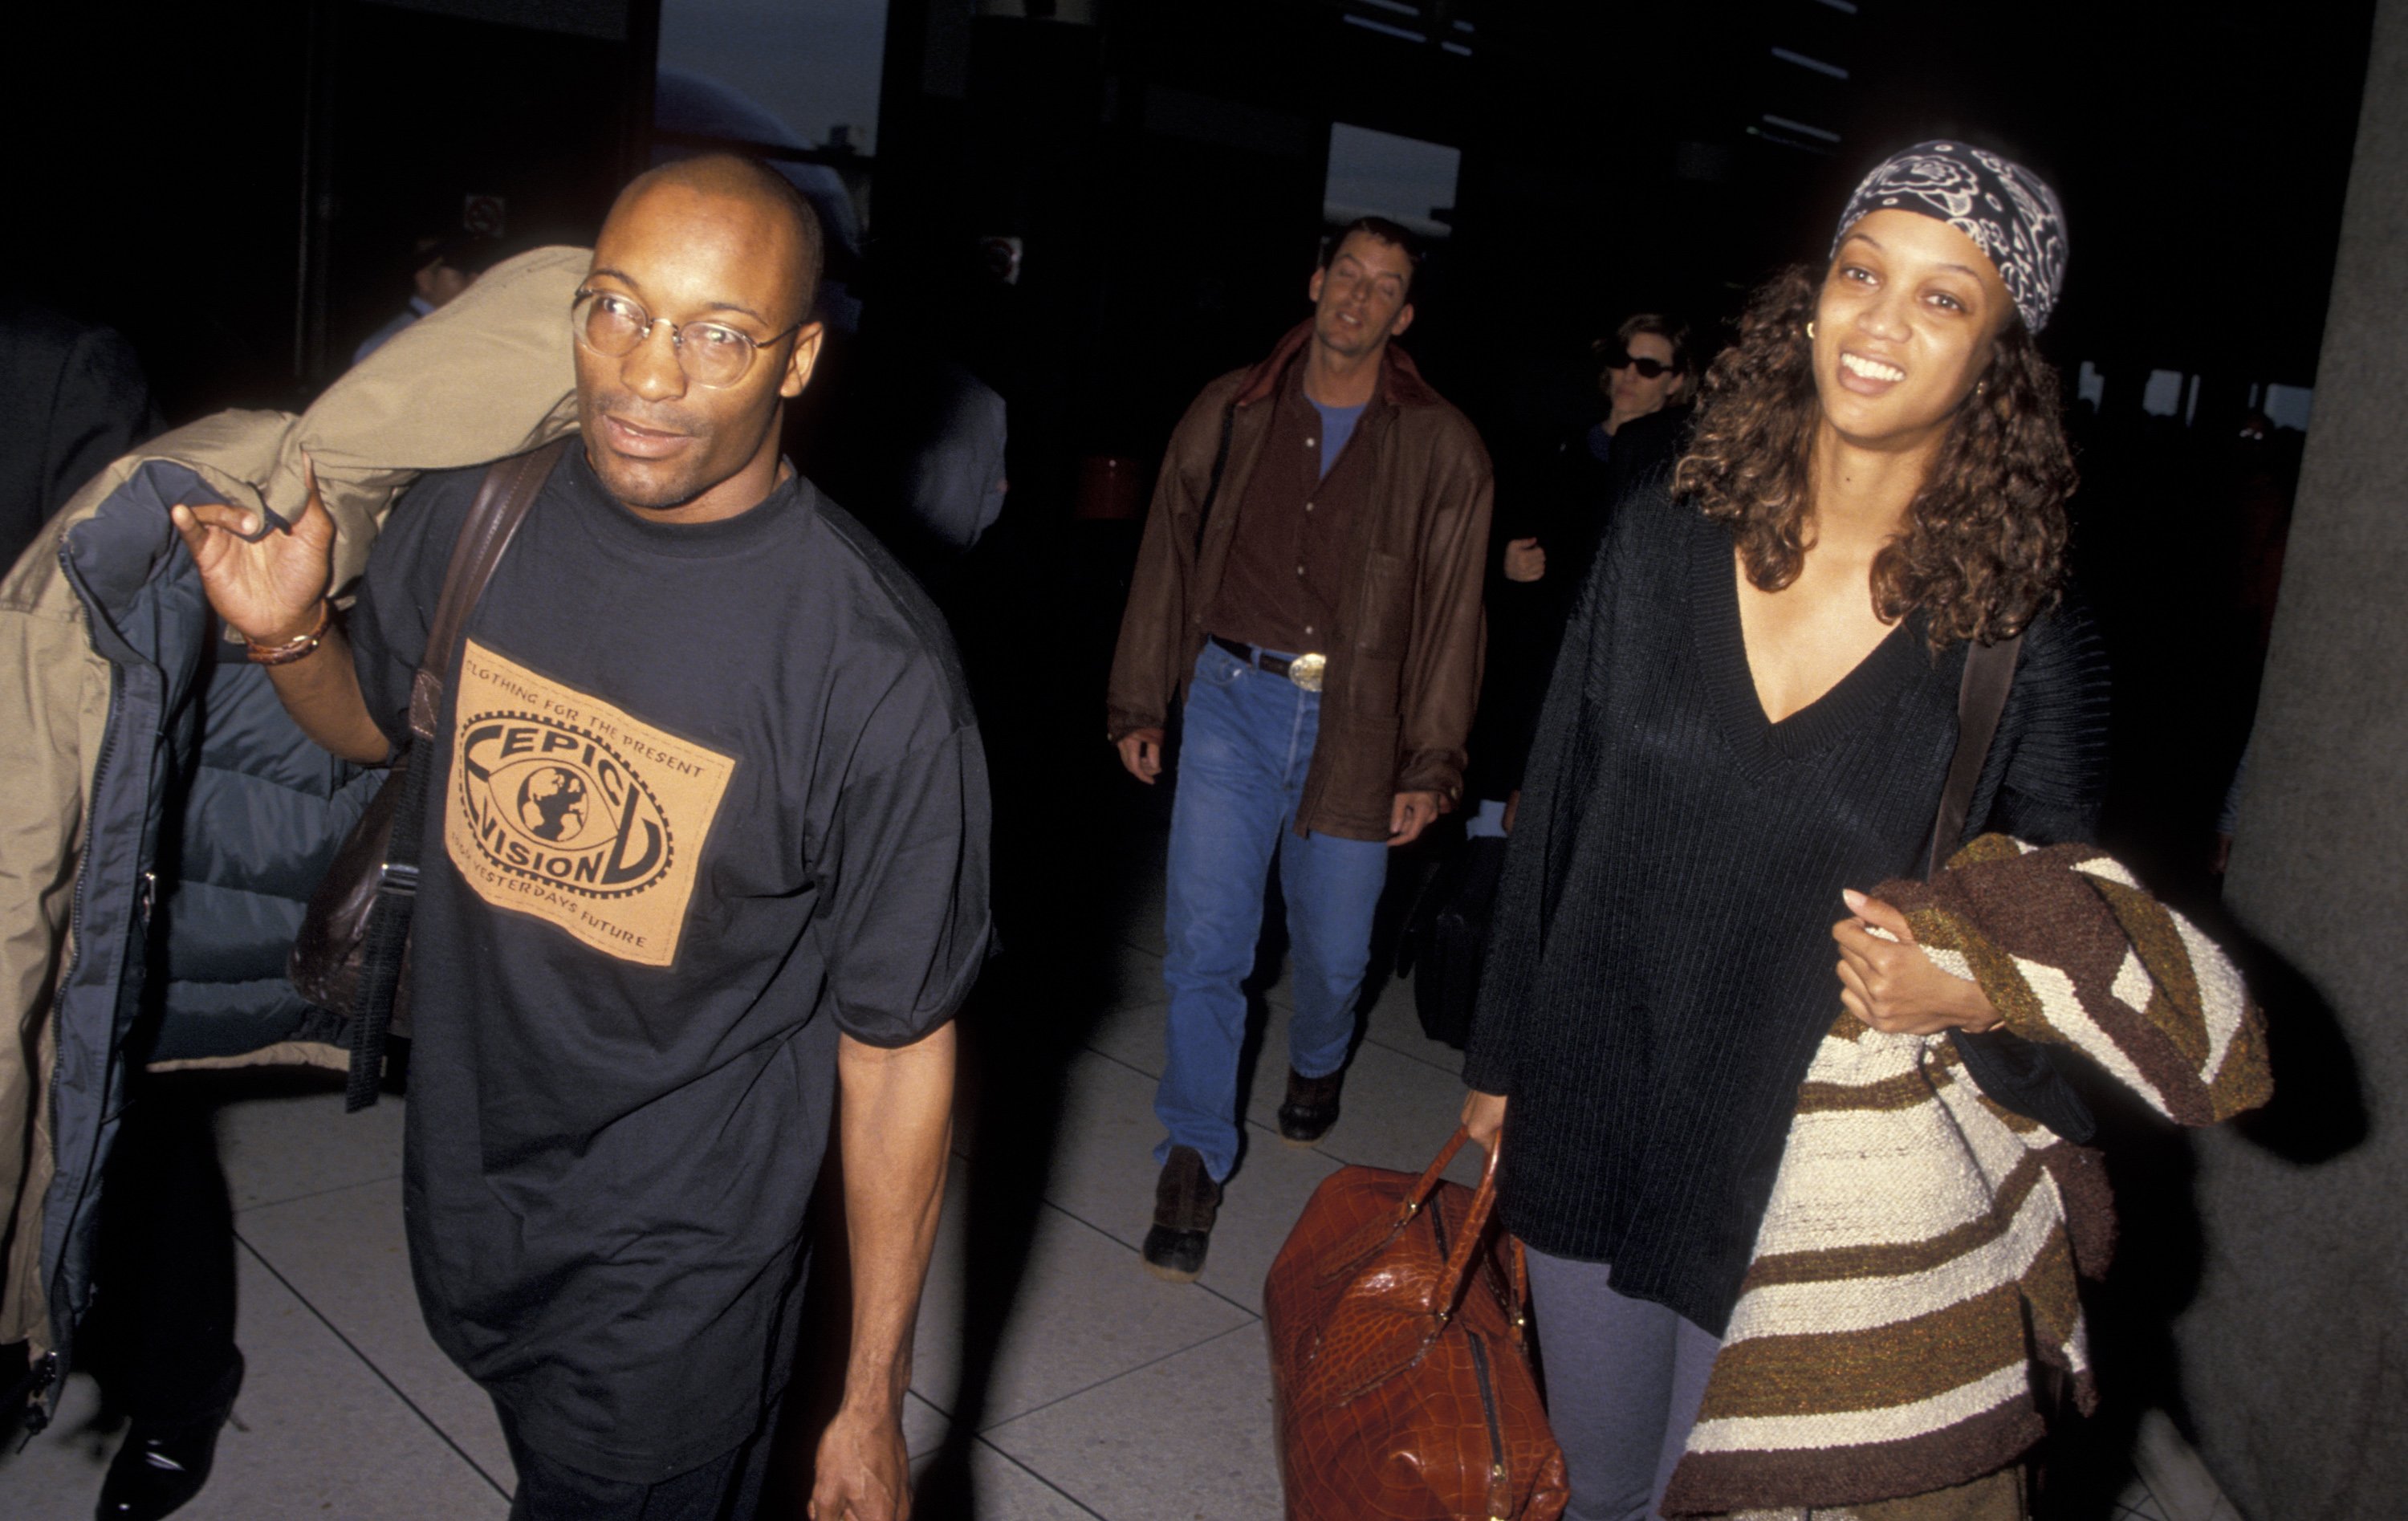 John Singleton and Tyra Banks traveling in casual clothes and walking in the 1990s.